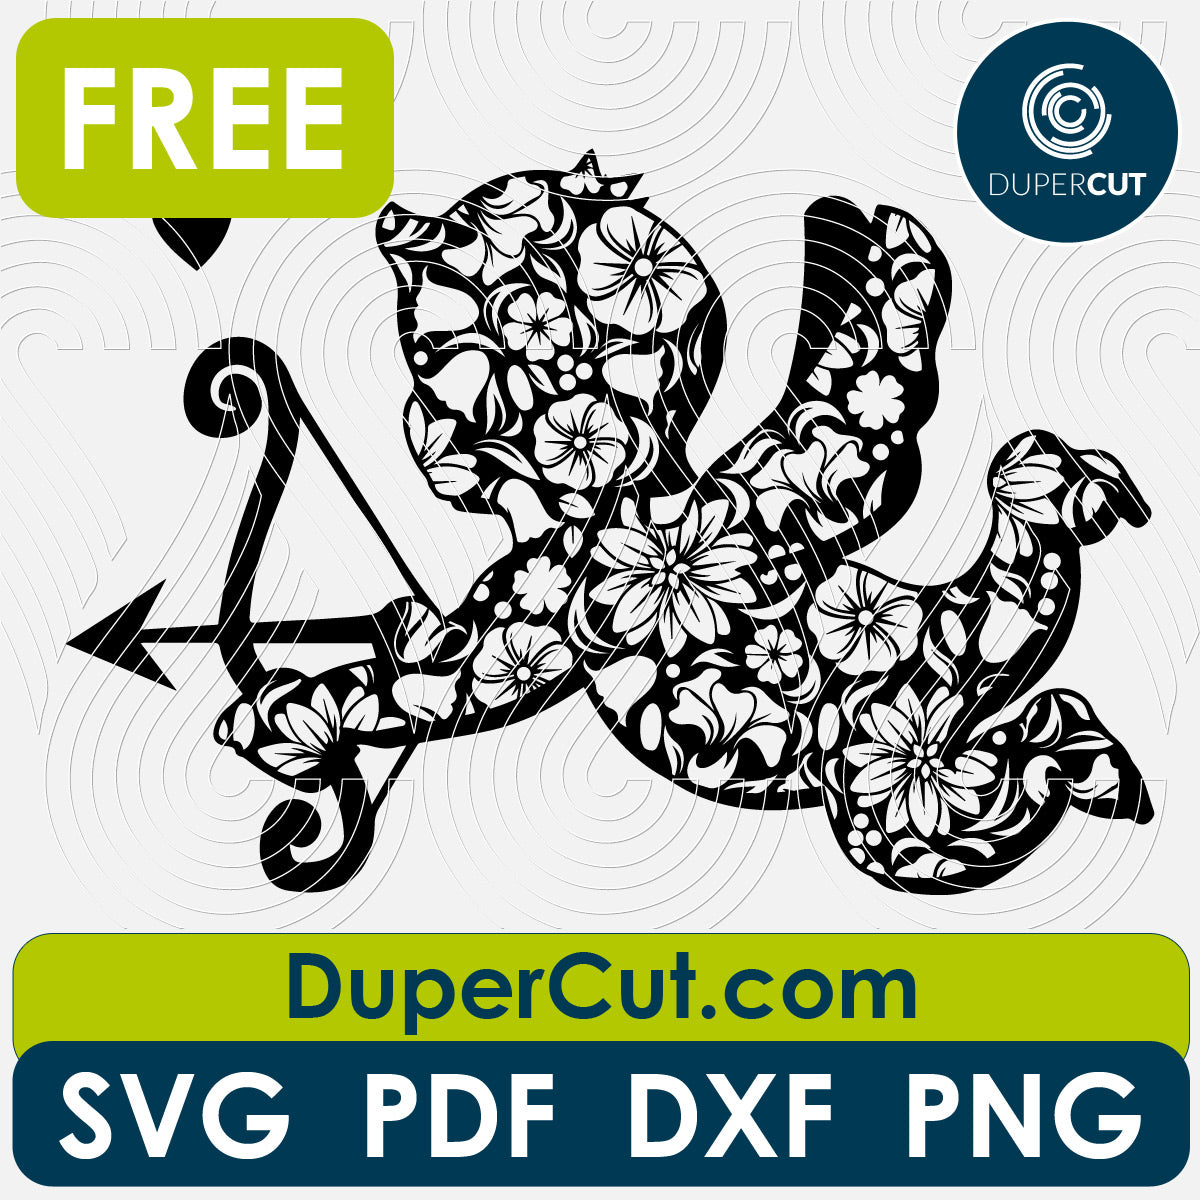 Cupid with bow and arrow Valentines day, FREE cutting template SVG PNG DXF files for Glowforge, Cricut, Silhouette, CNC laser router by DuperCut.com